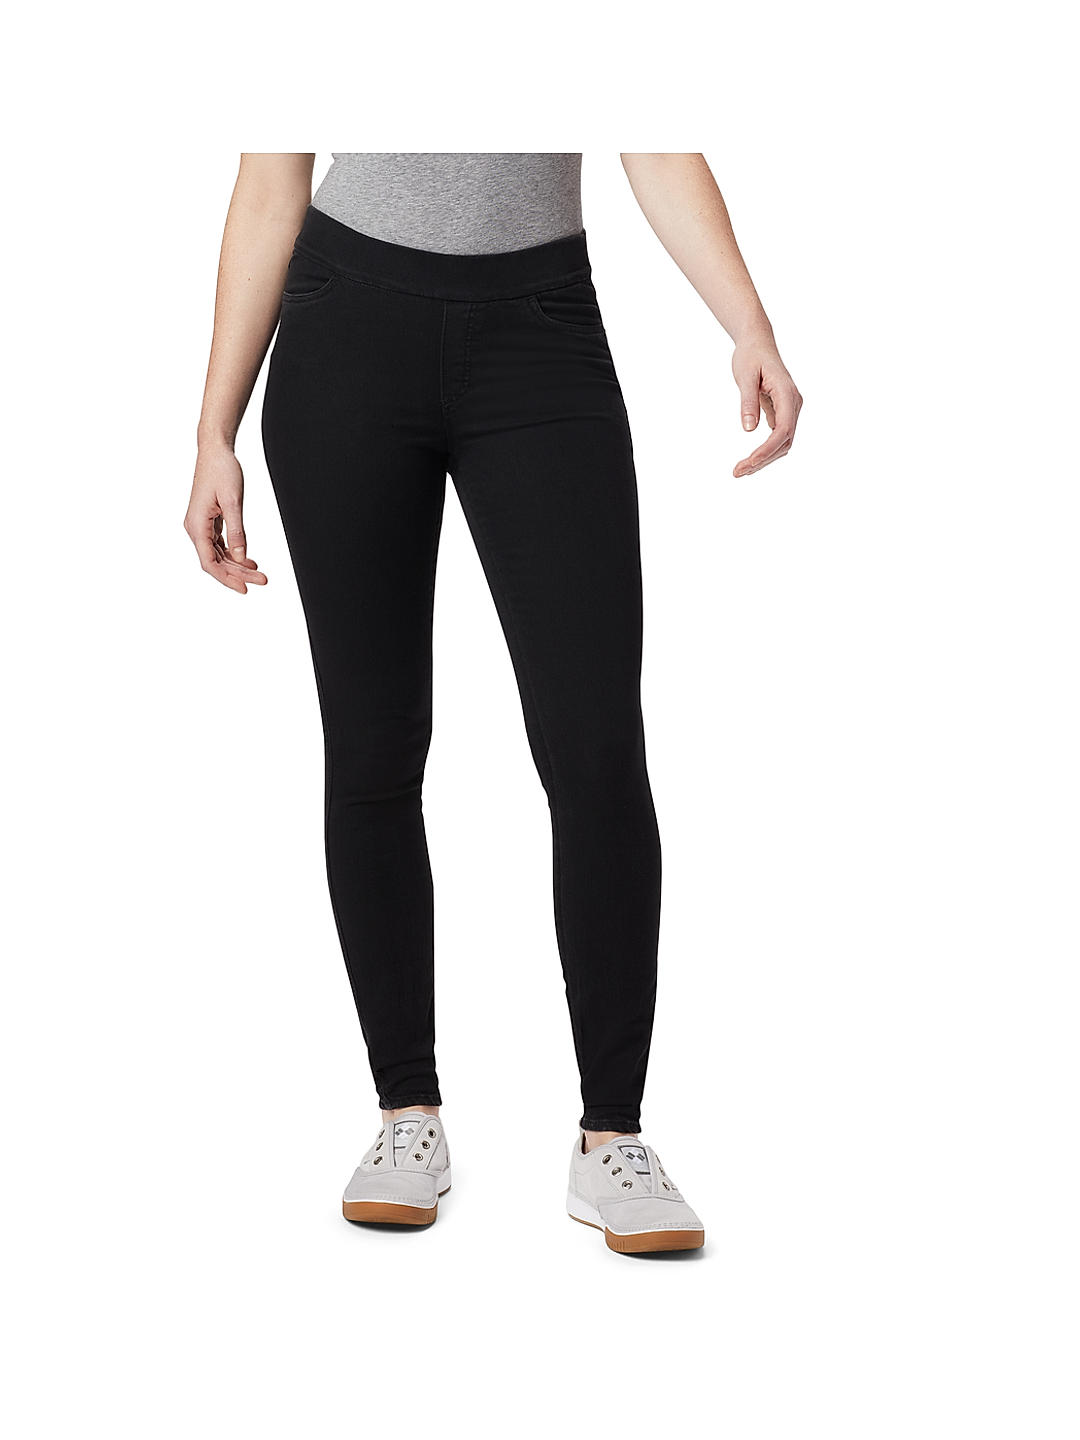 Buy AbsoluteFit Curved Panel Workout Tights for Women Online | Cultsport